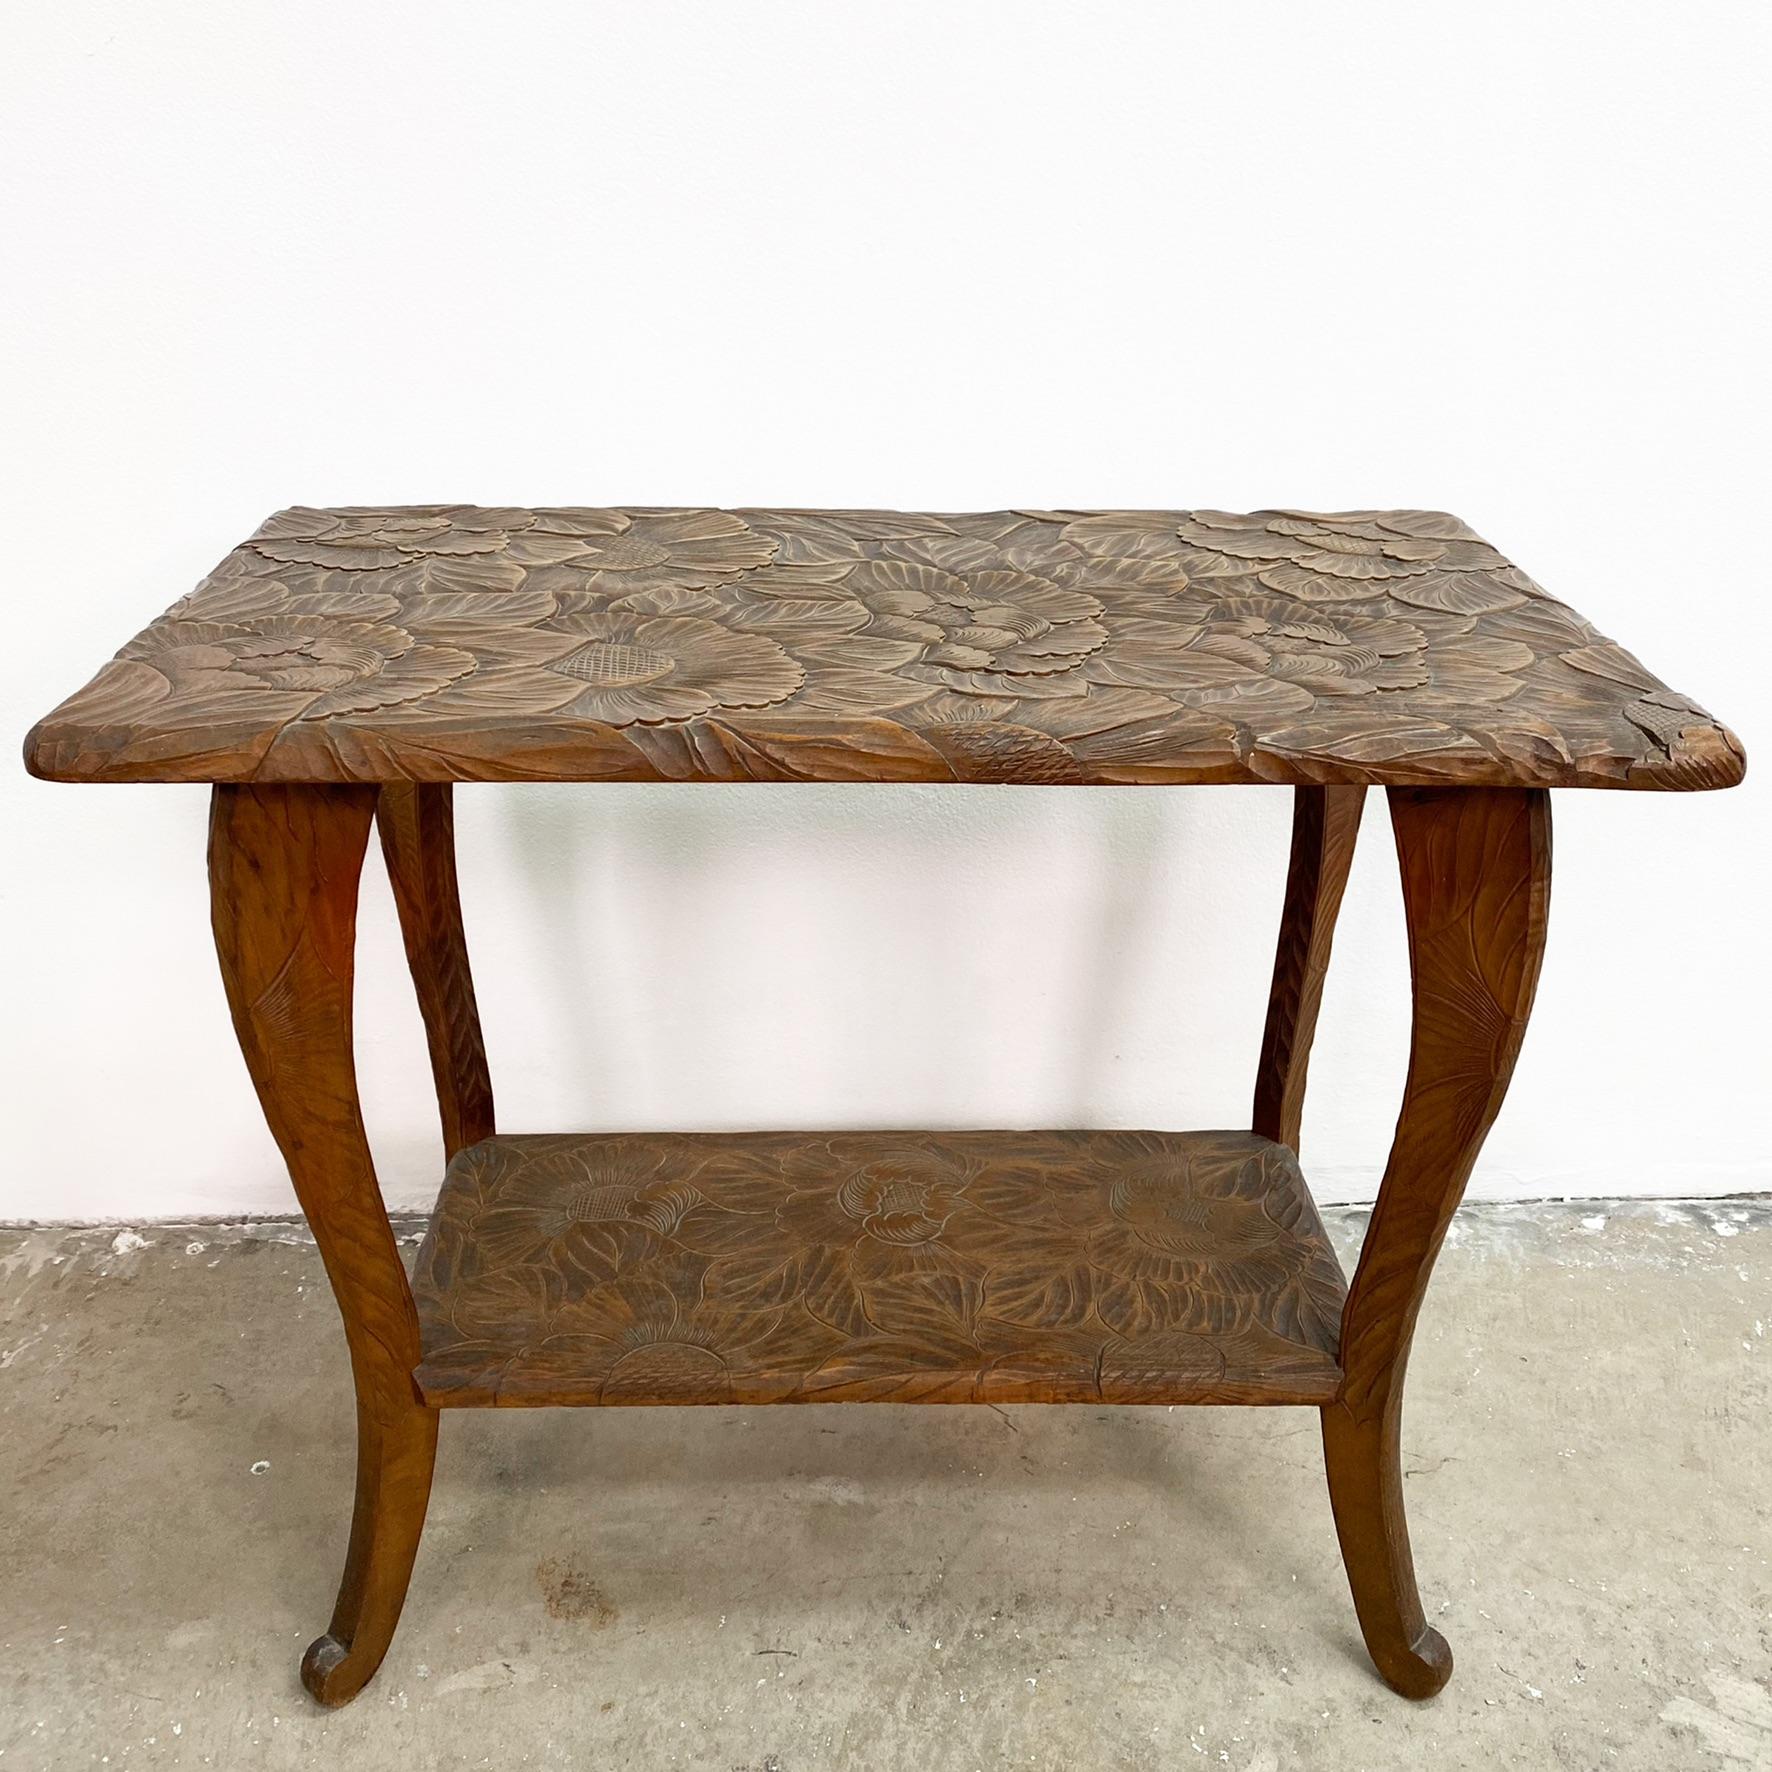 Stunning antique Art Nouveau side table, circa 1900, retailed by Liberty and Co,of London. These tables were hand carved in Japan to feature exotic and botanical motifs.

Featuring a deeply hand carved sunflower design, which is graphically bold